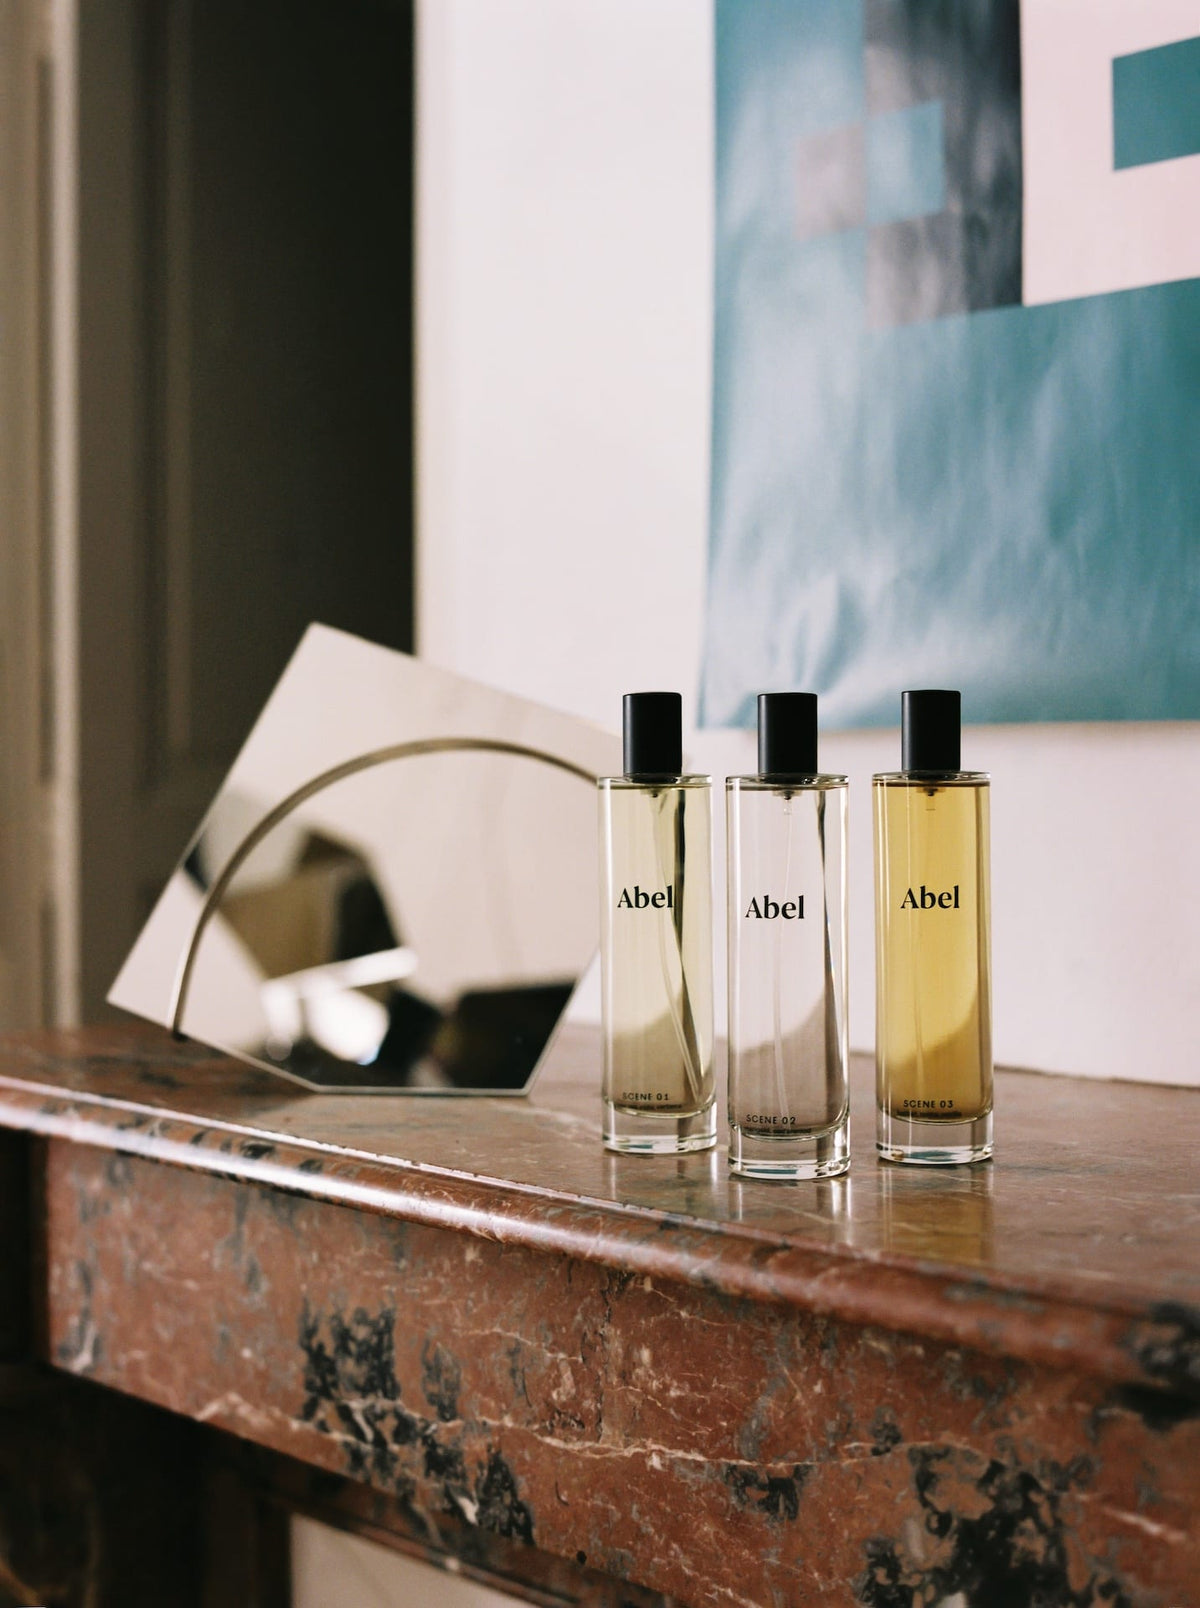 Three bottles of Abel Room Spray – Scene 02 ⋅ fig, marigold, cedarwood on a wooden mantelpiece with a round mirror in the background.